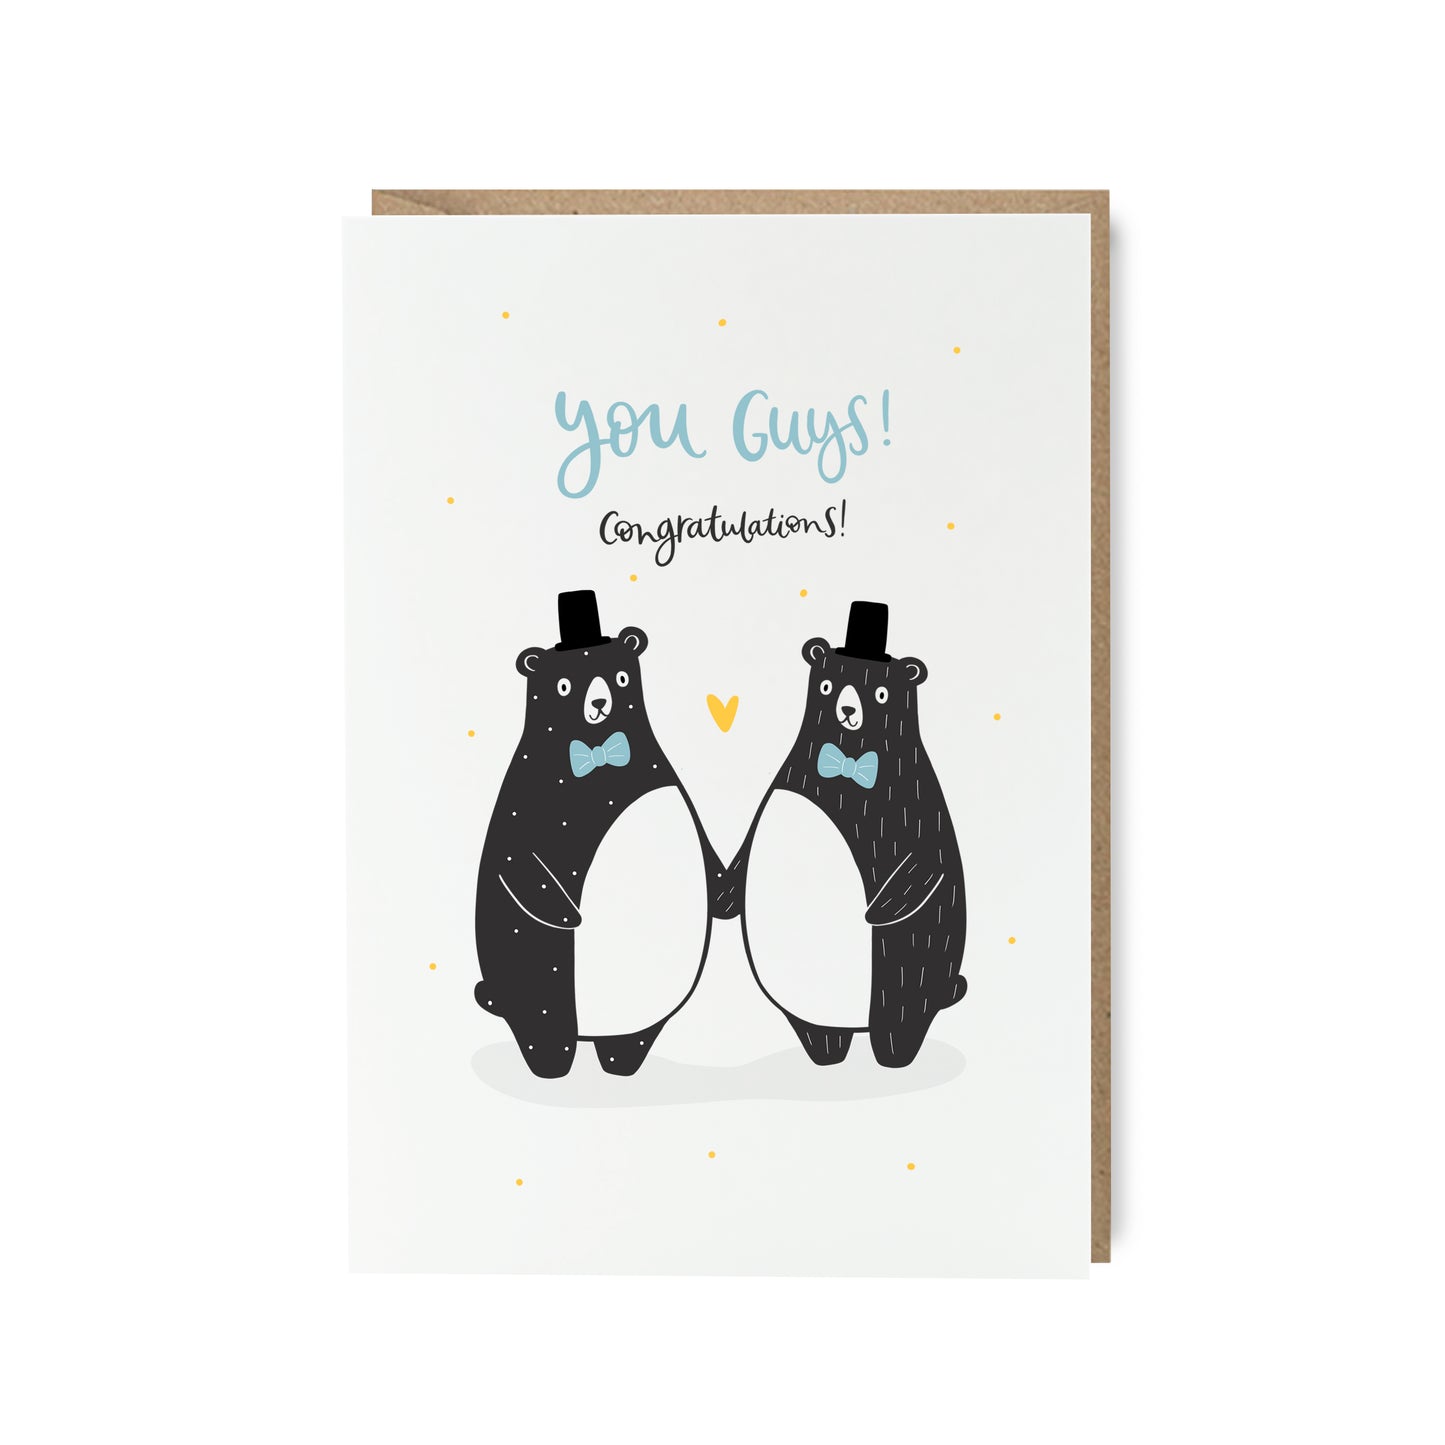 Mr and mr engagement wedding card with bears by Abbie Imagine